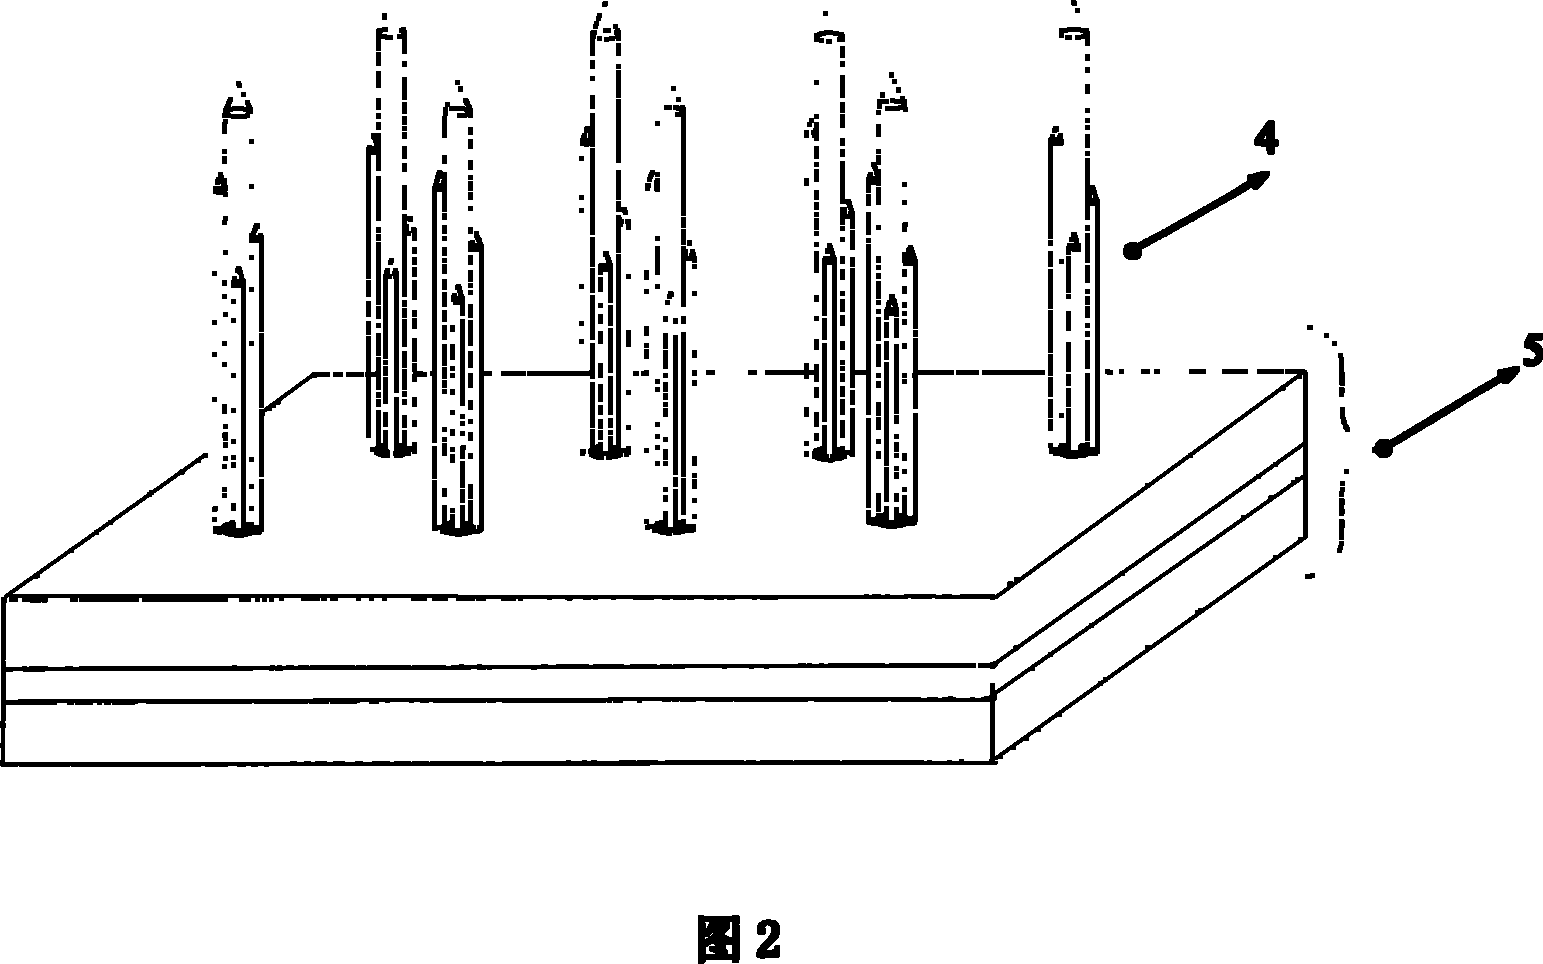 Cluster stimulating micro electrode array capable of being implanted into nerve system of human body